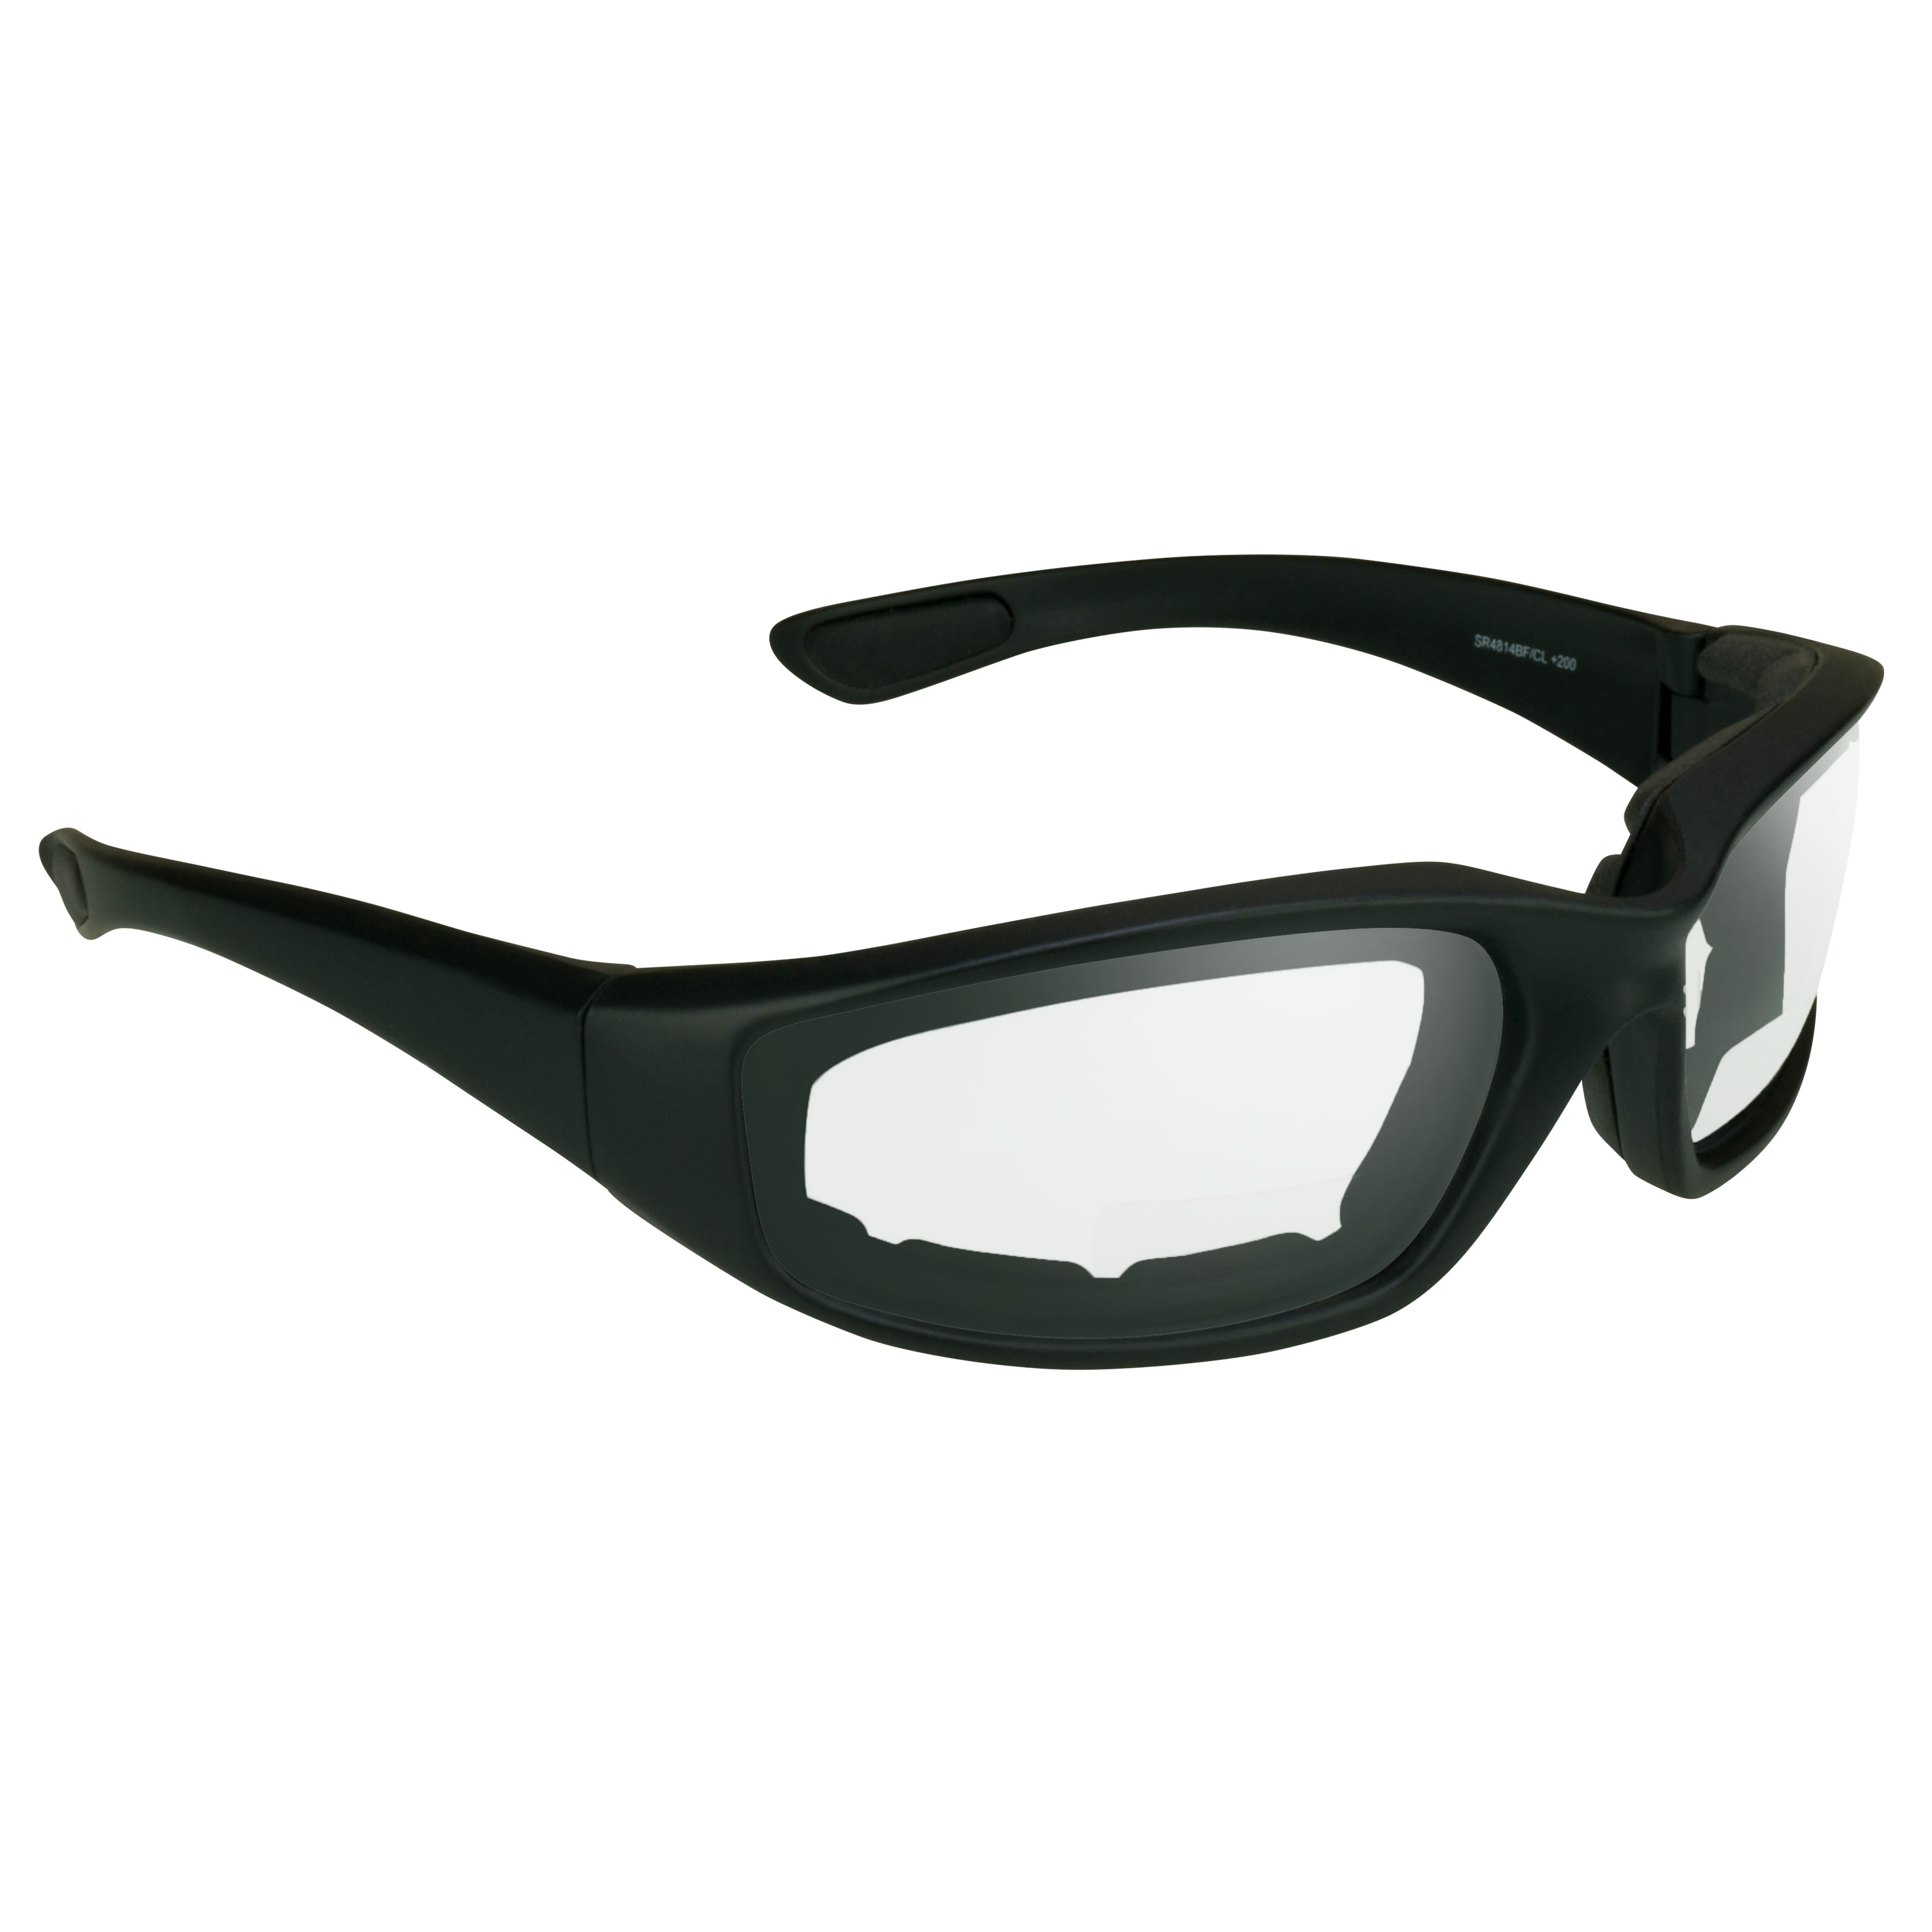 Fit Large Head Sizes. Bikershades Bifocal Motorcycle Sunglass Reader Z87 Safety Padded Mens 